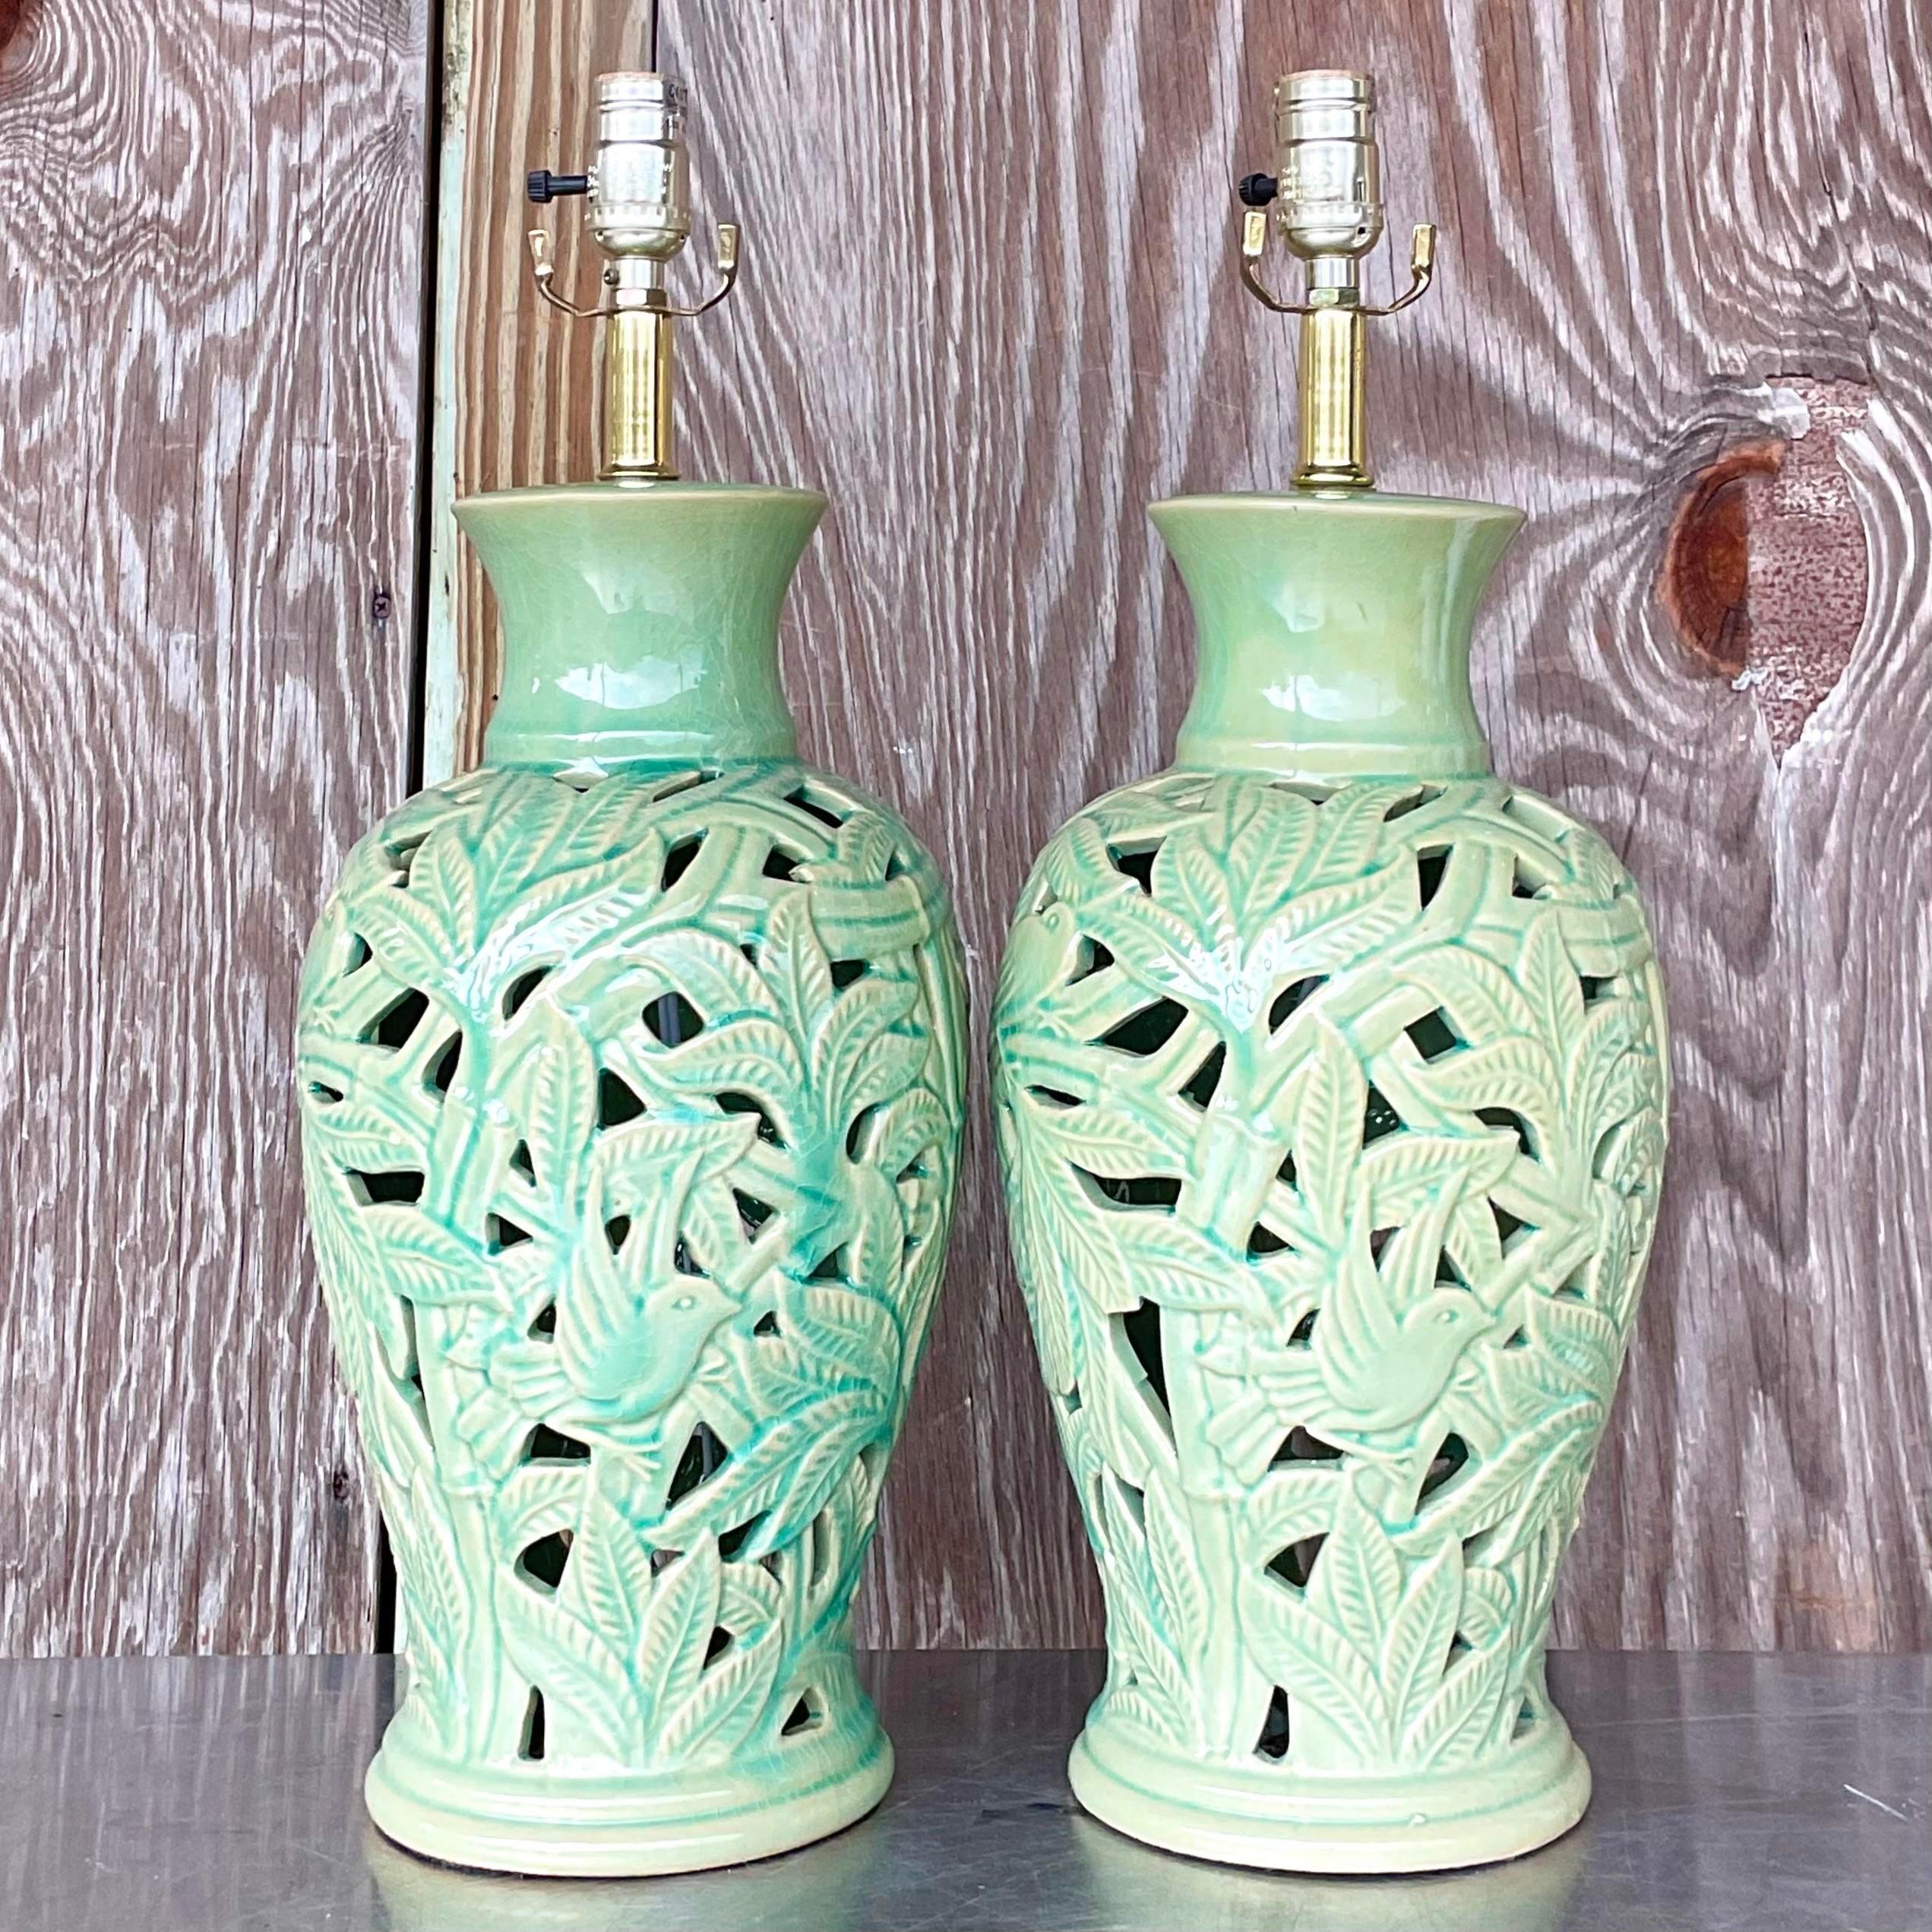 A stunning pair of vintage Boho table lamps. A gorgeous green glazed camera body with a chic cut out leaf design. Acquired from a Palm Beach estate.